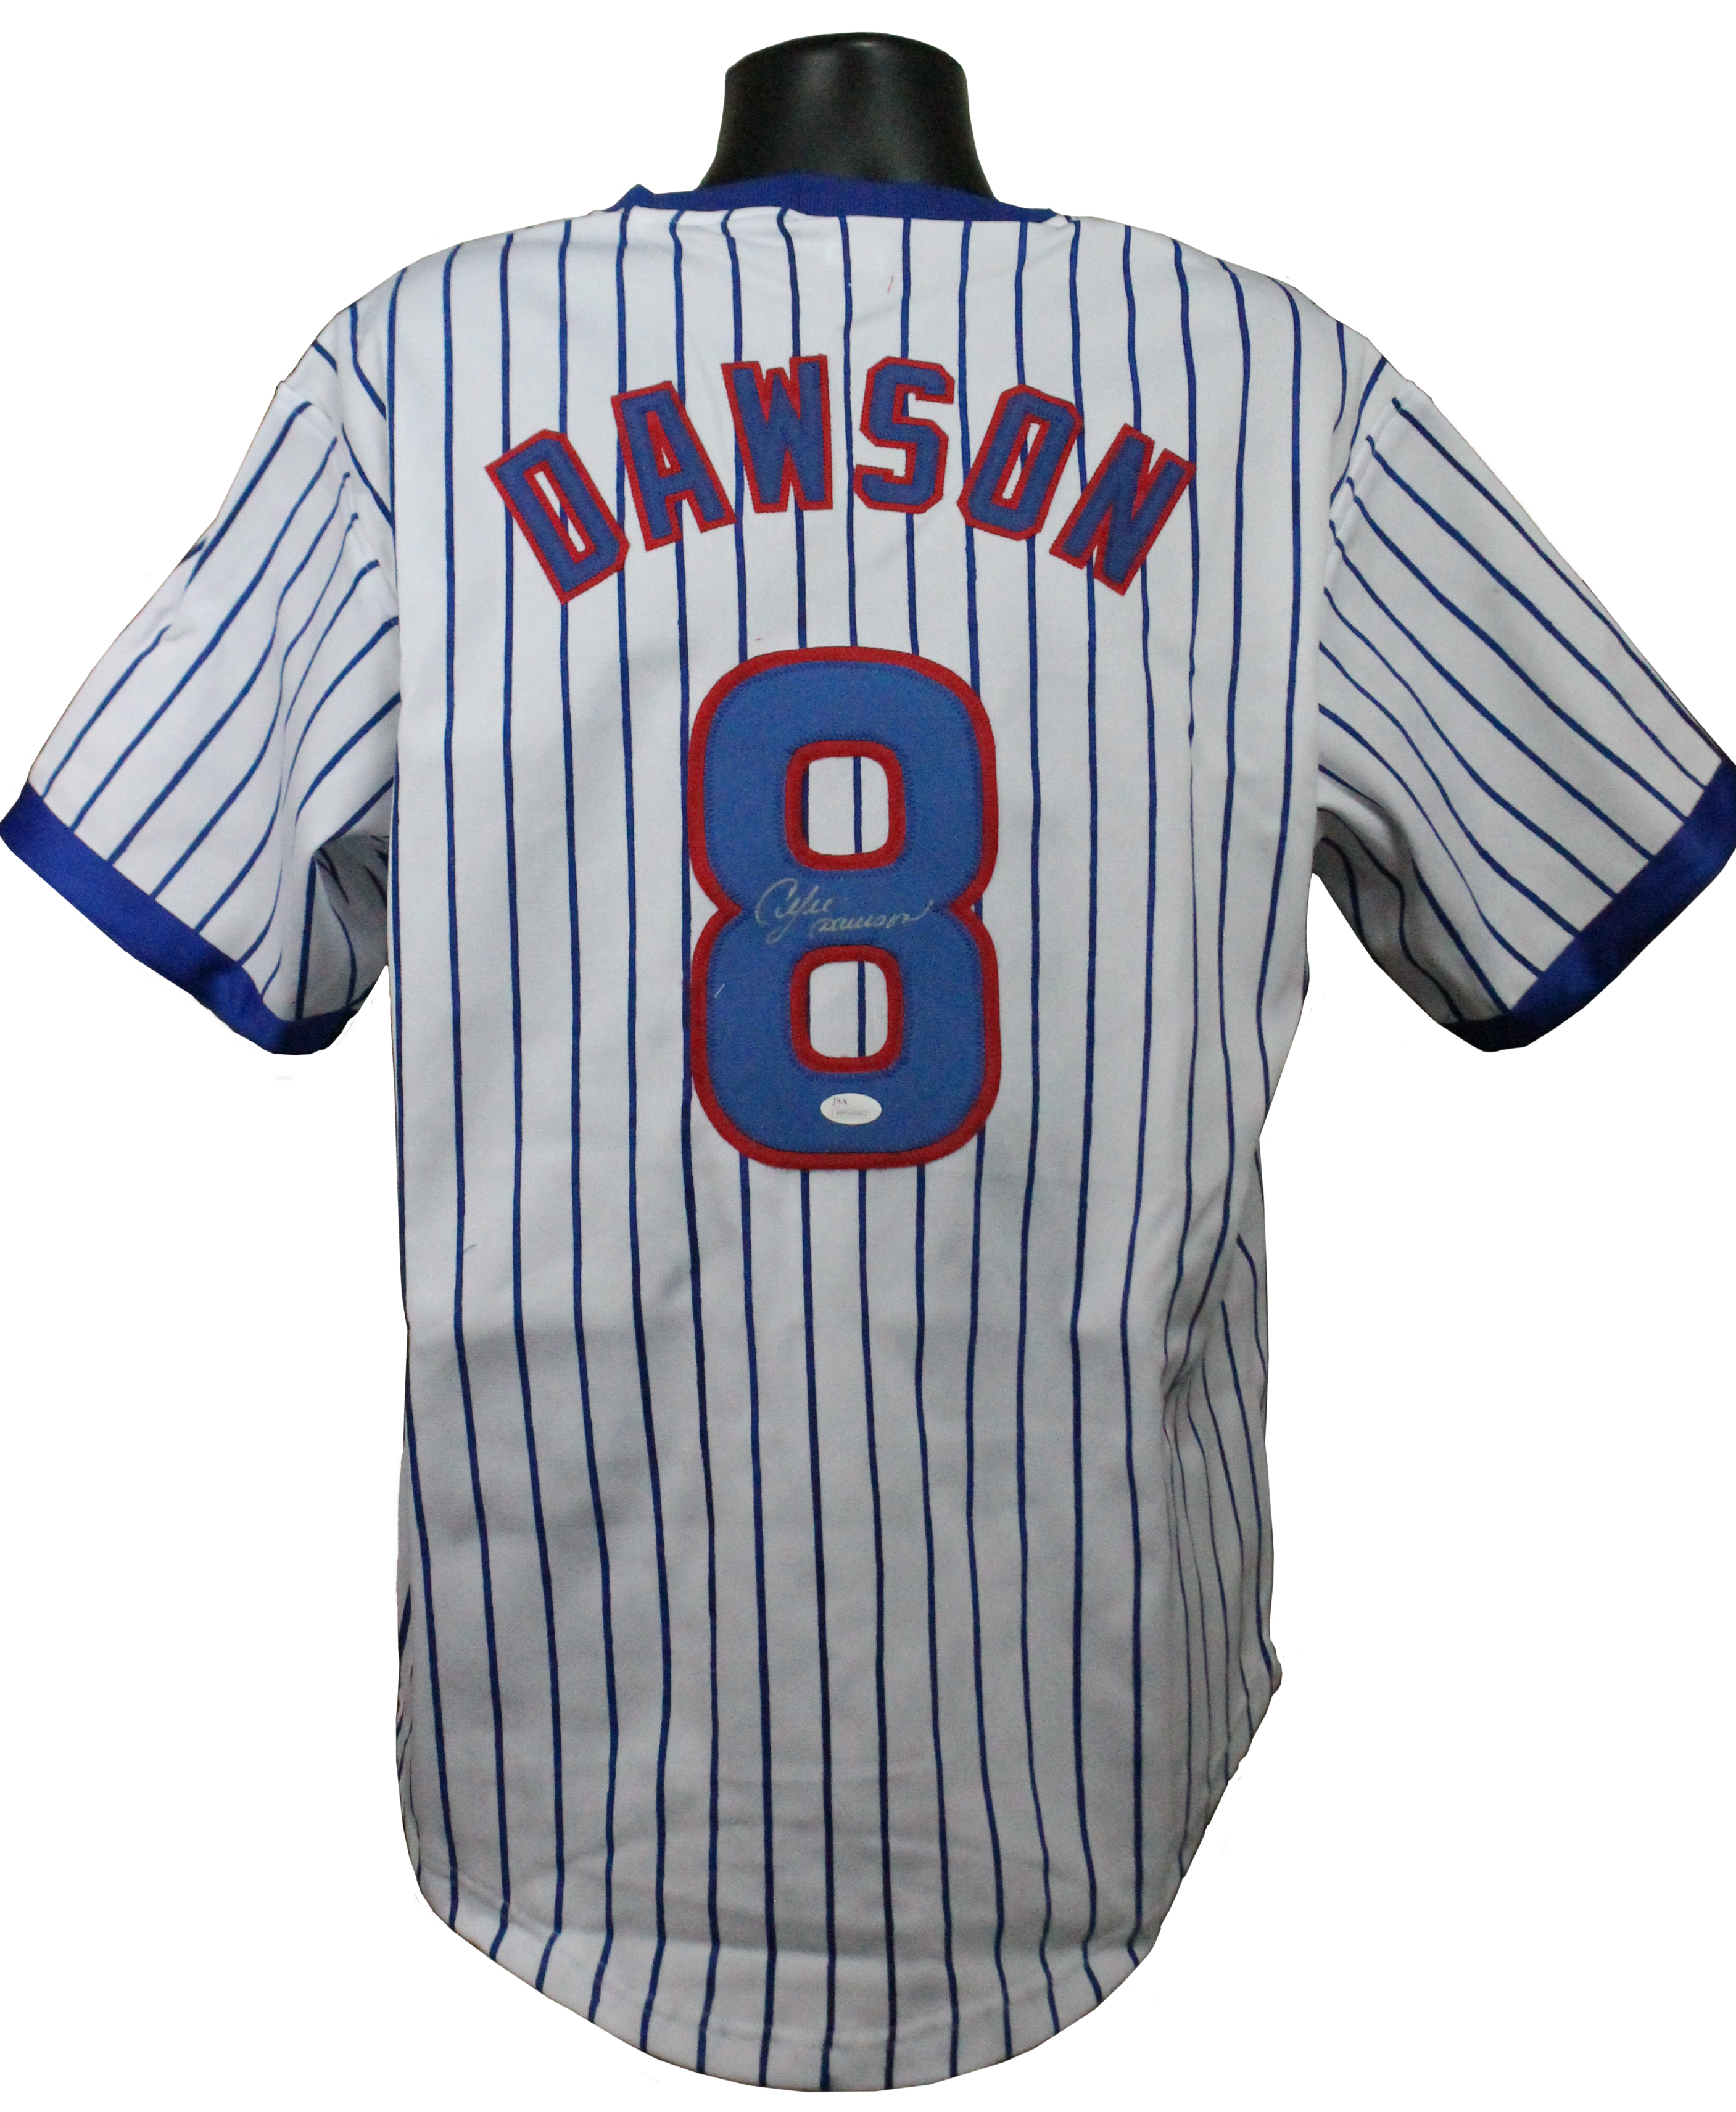 andre dawson signed jersey